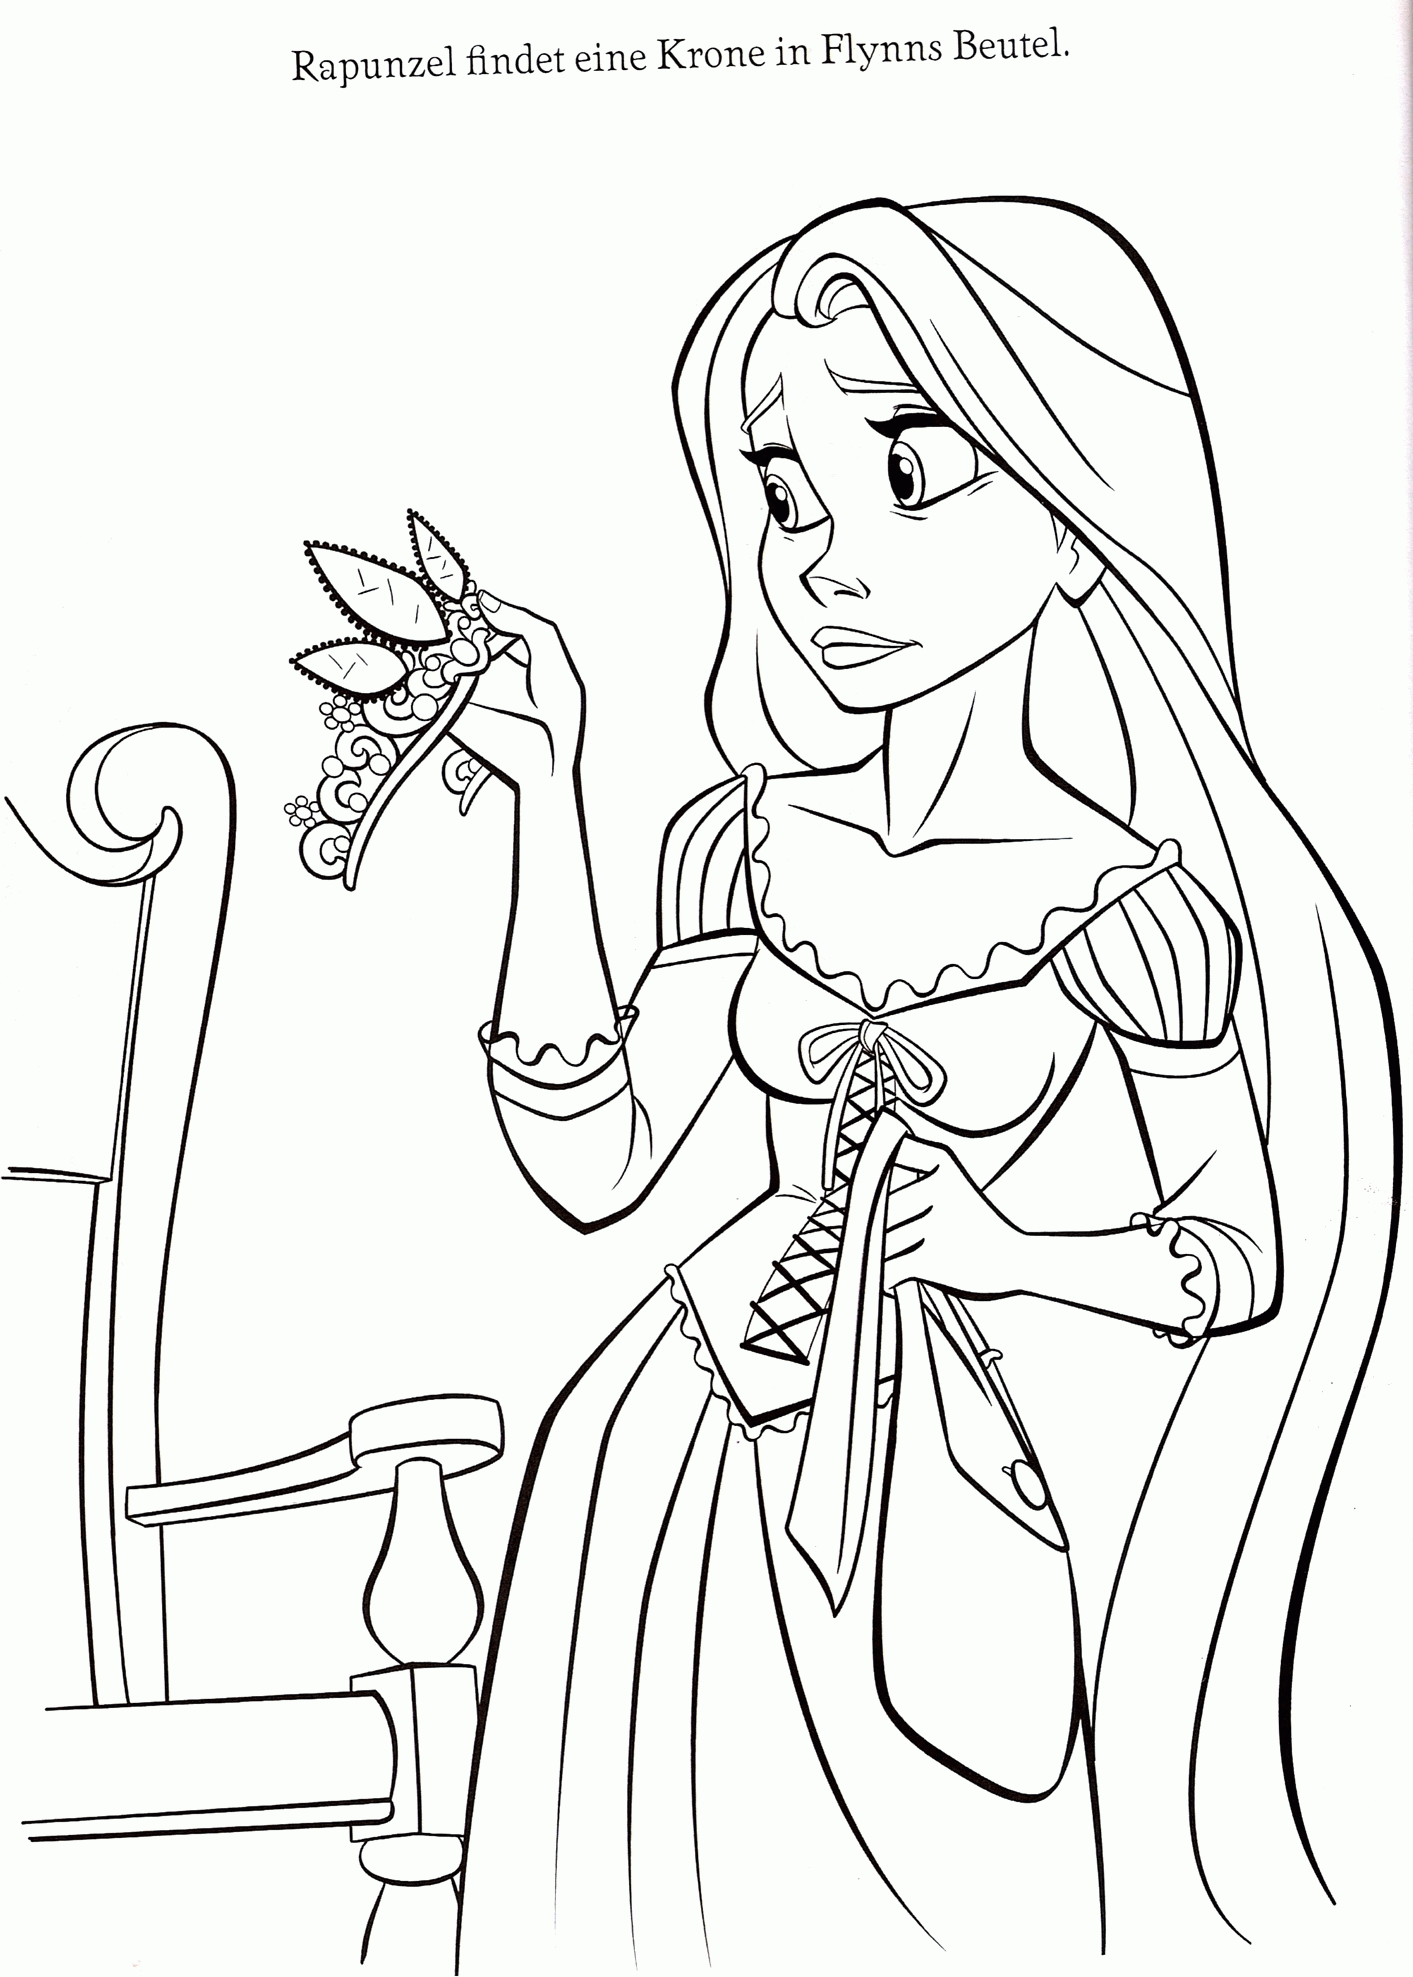 free-coloring-pages-for-disney-princesses-download-free-coloring-pages